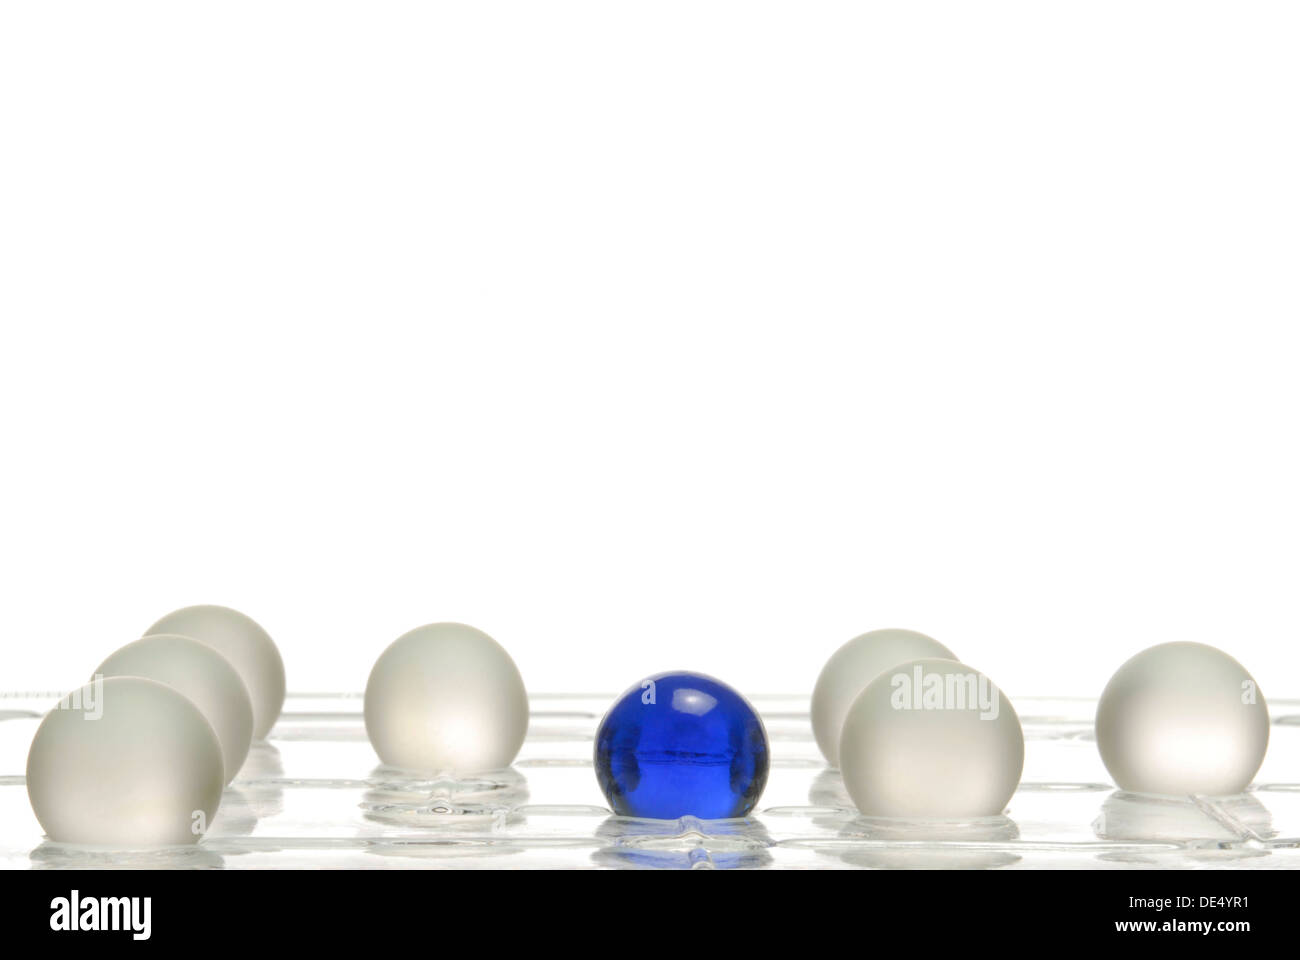 White balls and one blue ball on a game board, symbolic image for being different Stock Photo